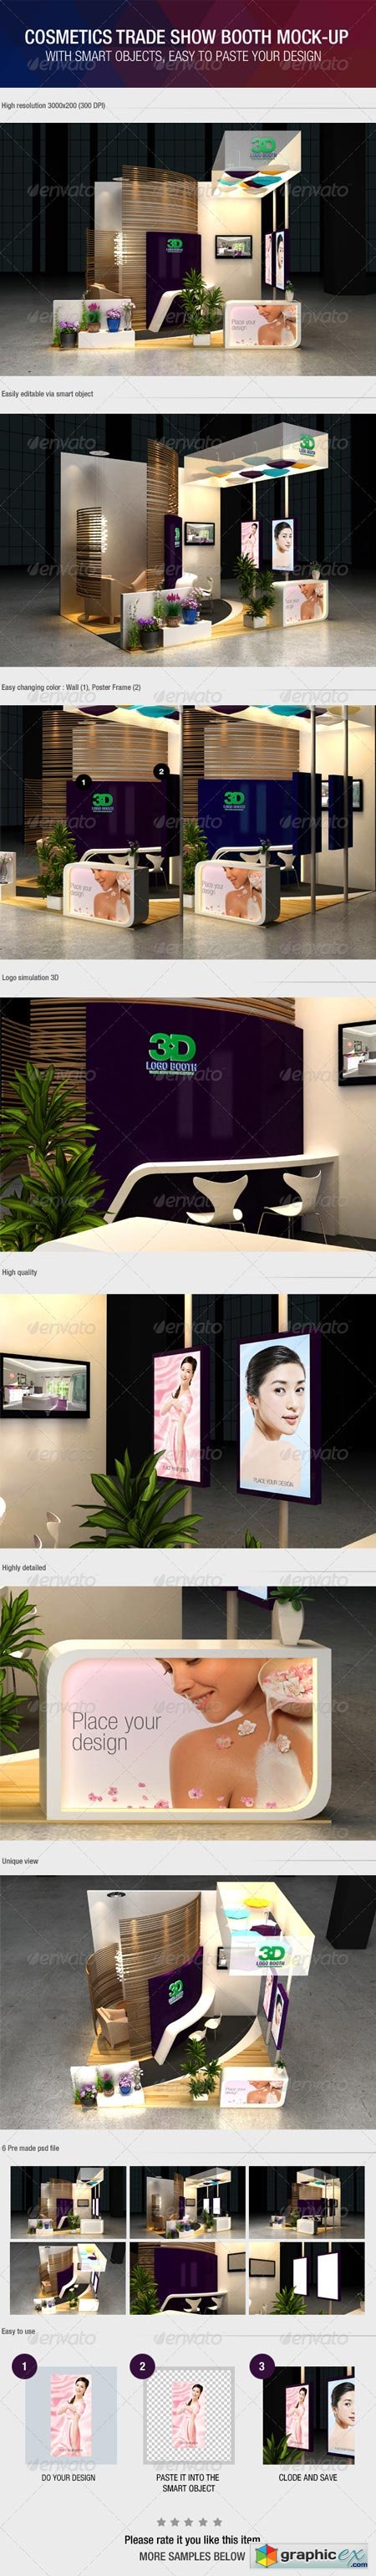 Cosmetics Exhibition Booth Mock-Up 6387882